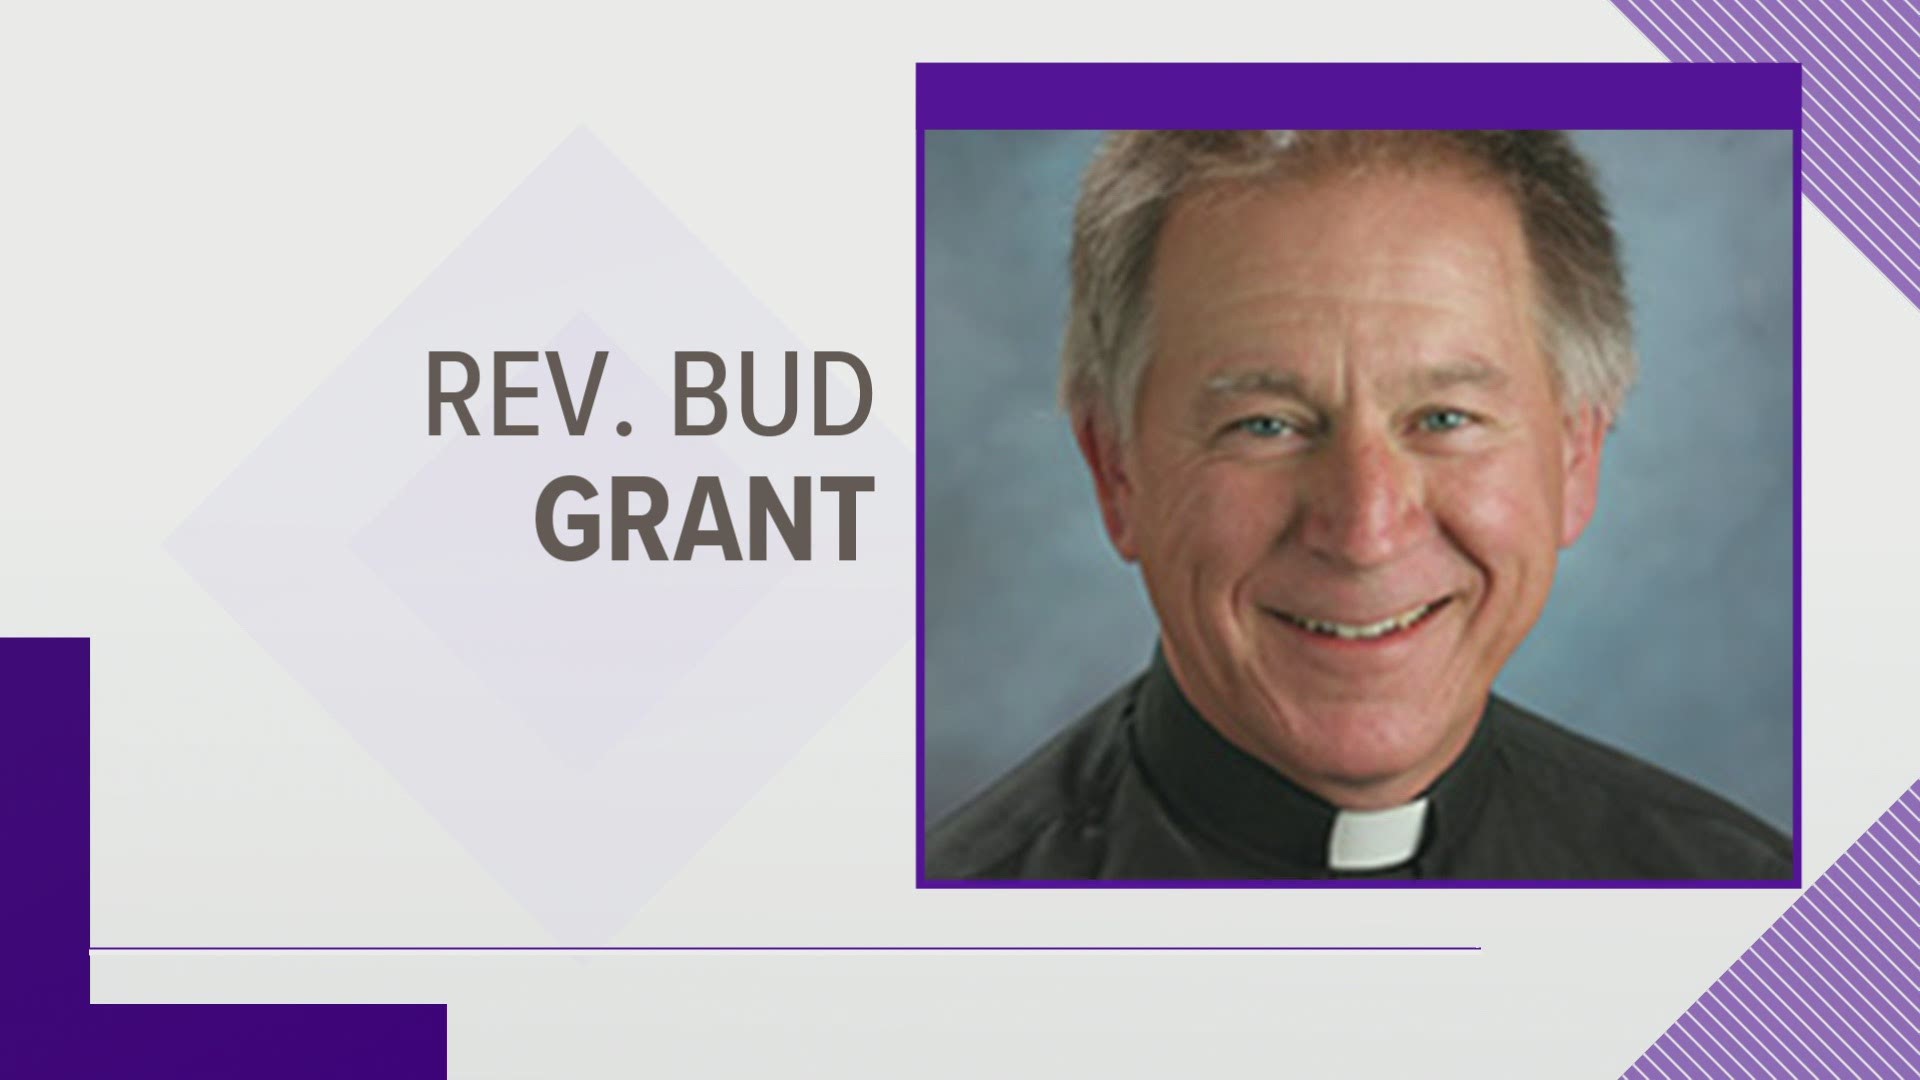 The investigation by the Diocese of Des Moines centered on the Rev. Bud Grant.